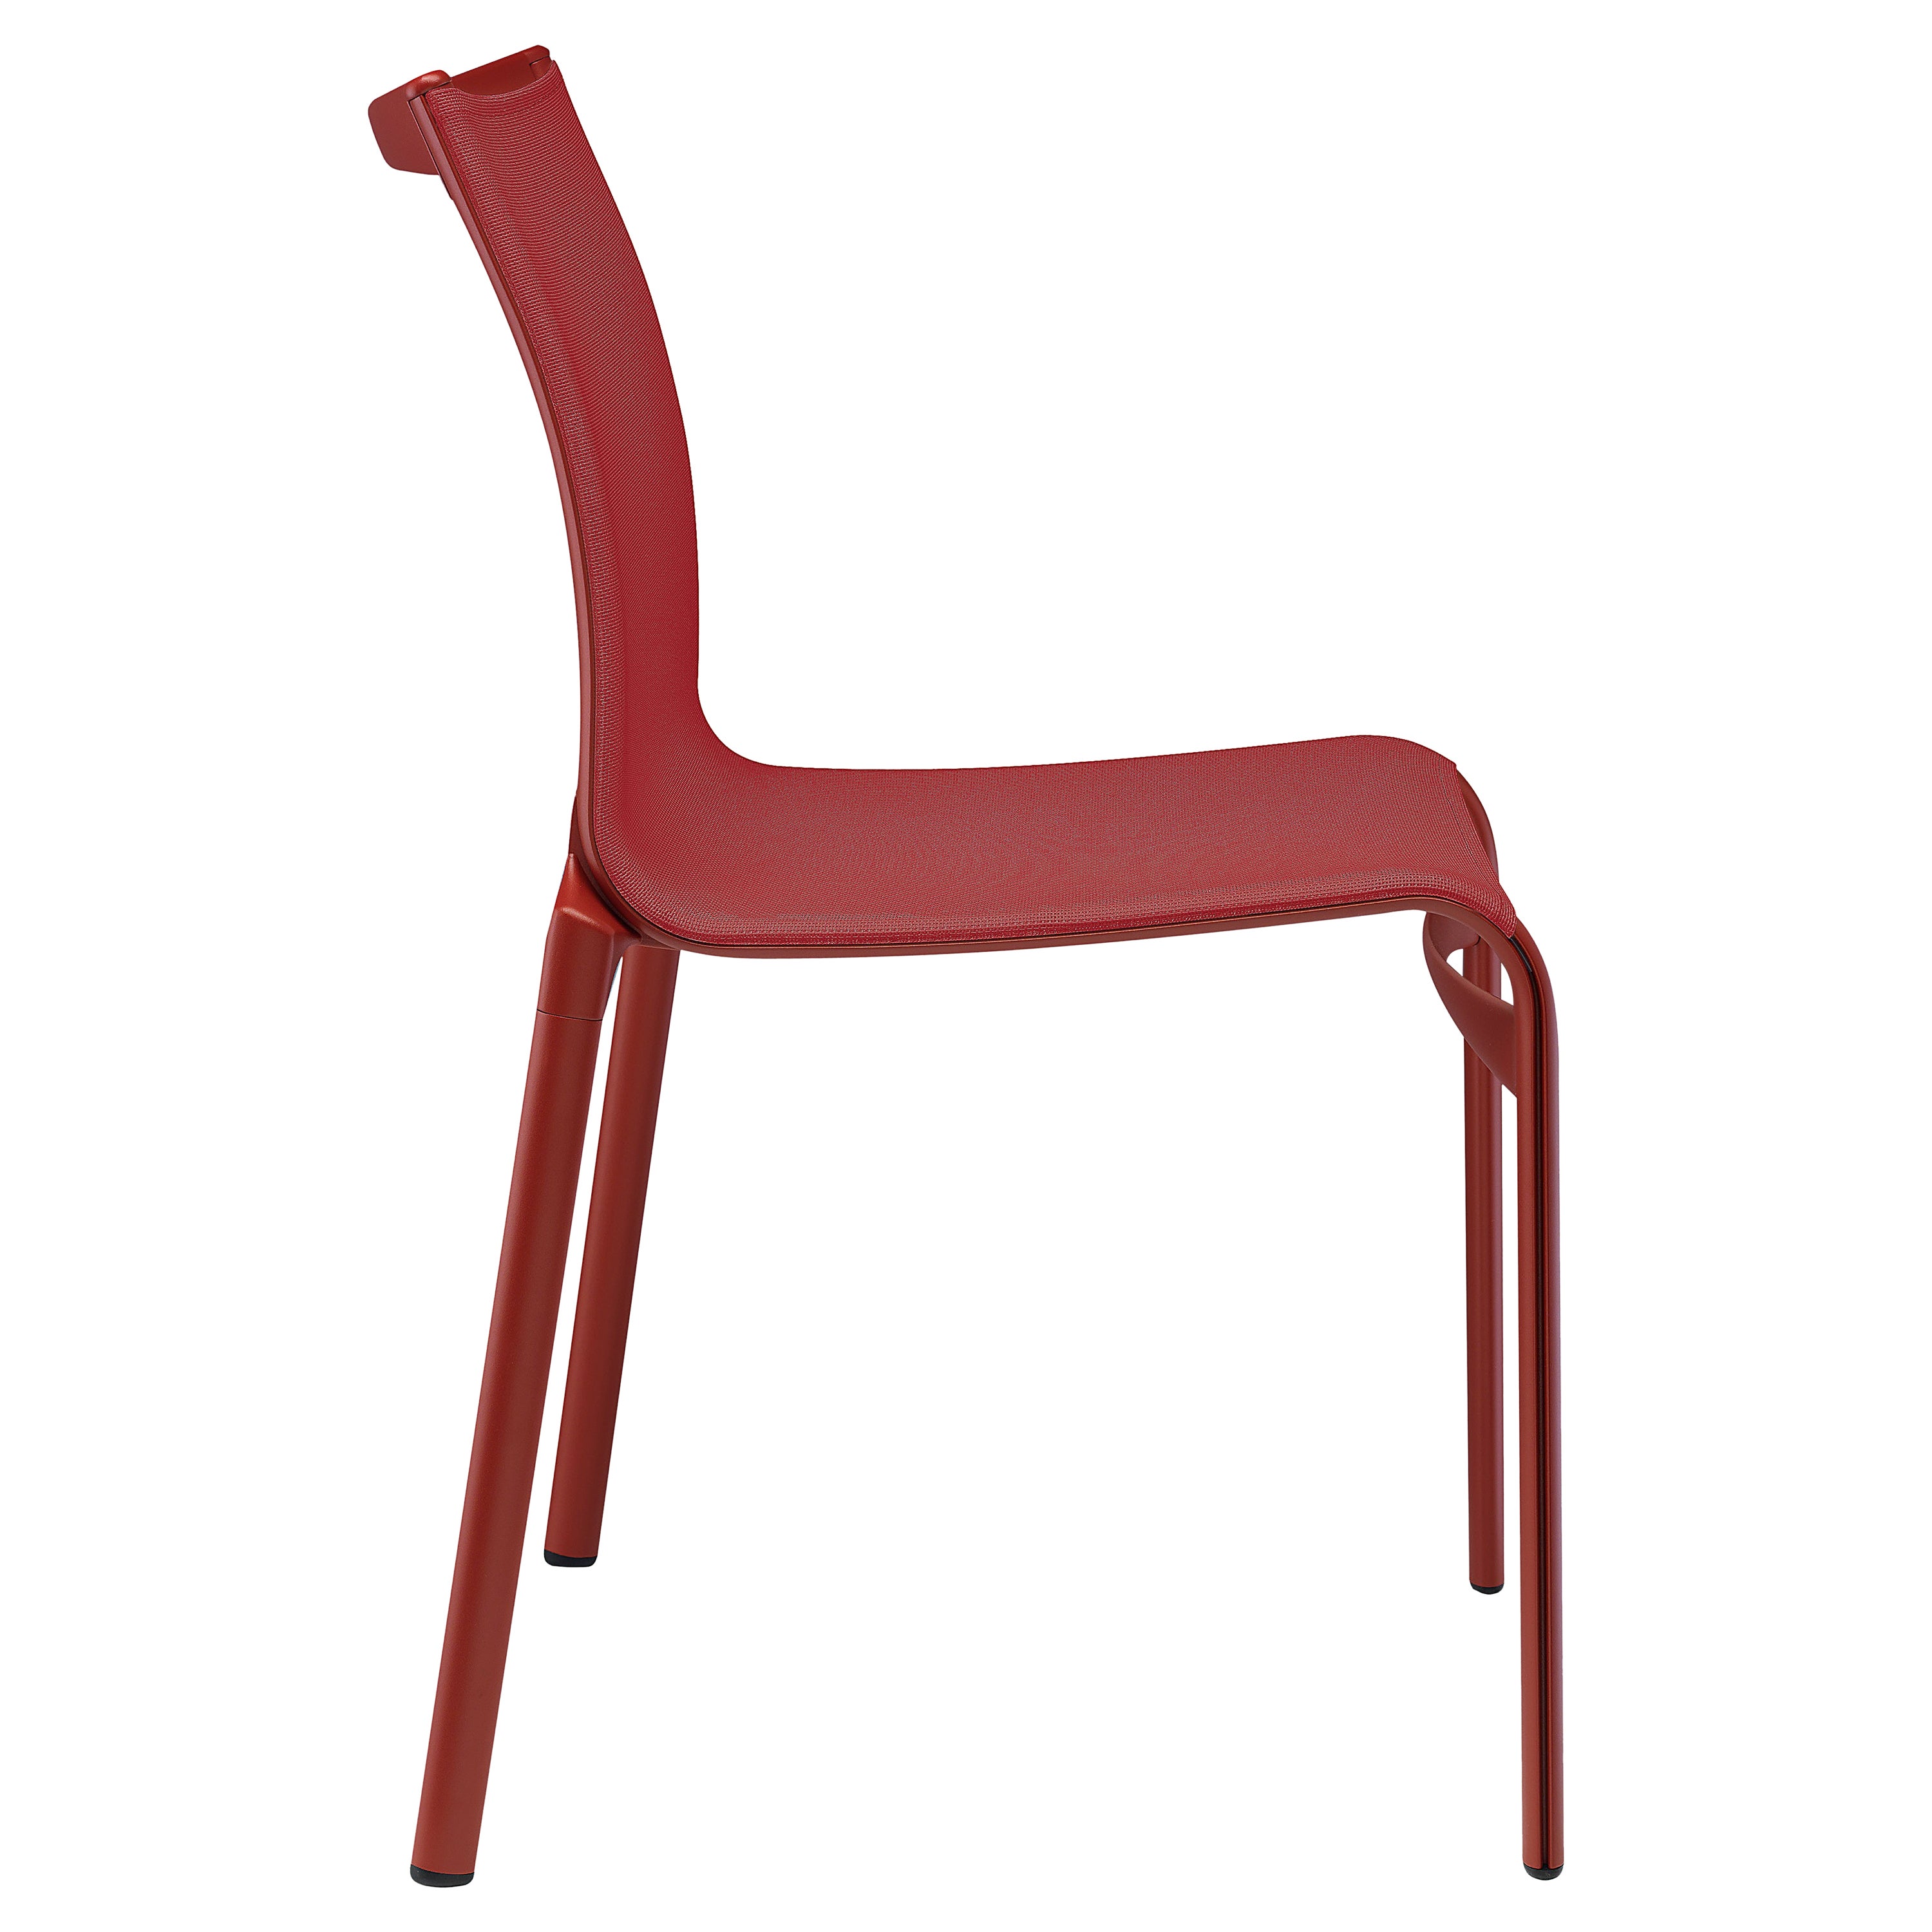 Alias Bigframe 44 Chair in Coral Red Mesh with Lacquered Aluminium Frame For Sale